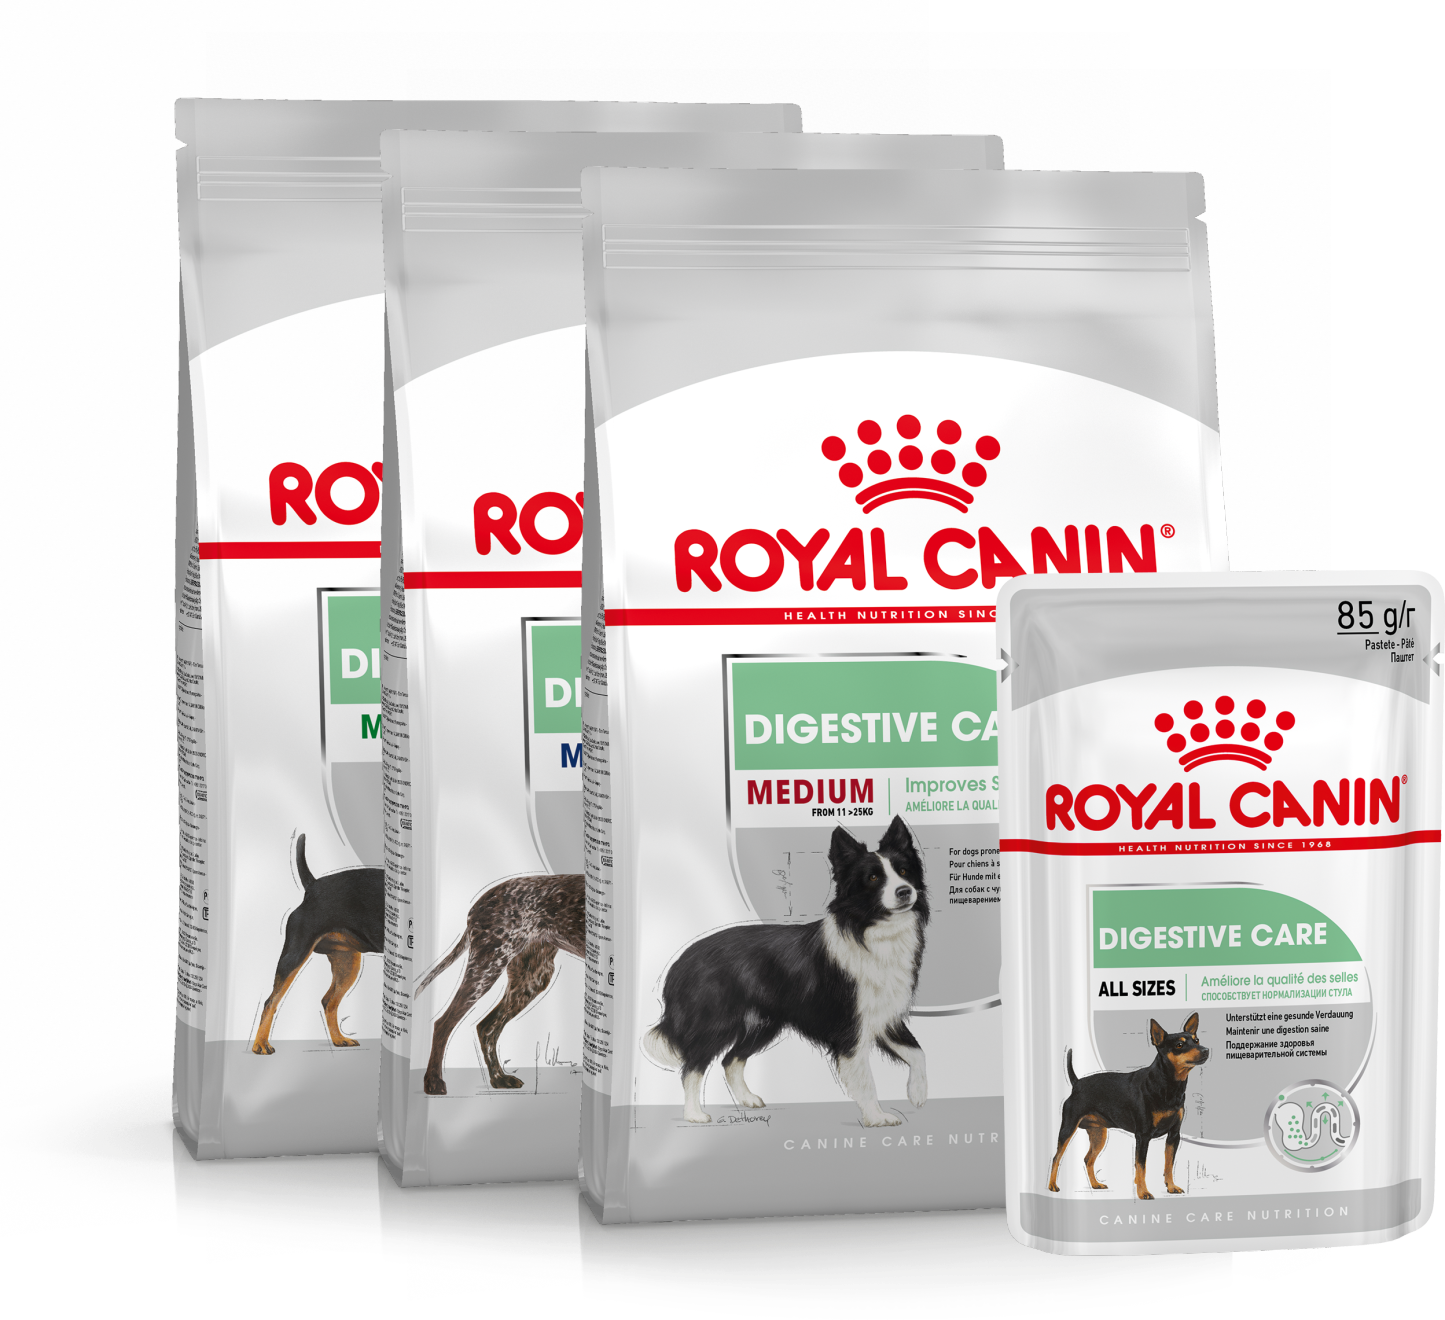 Royal Canin Digestive Care for dogs